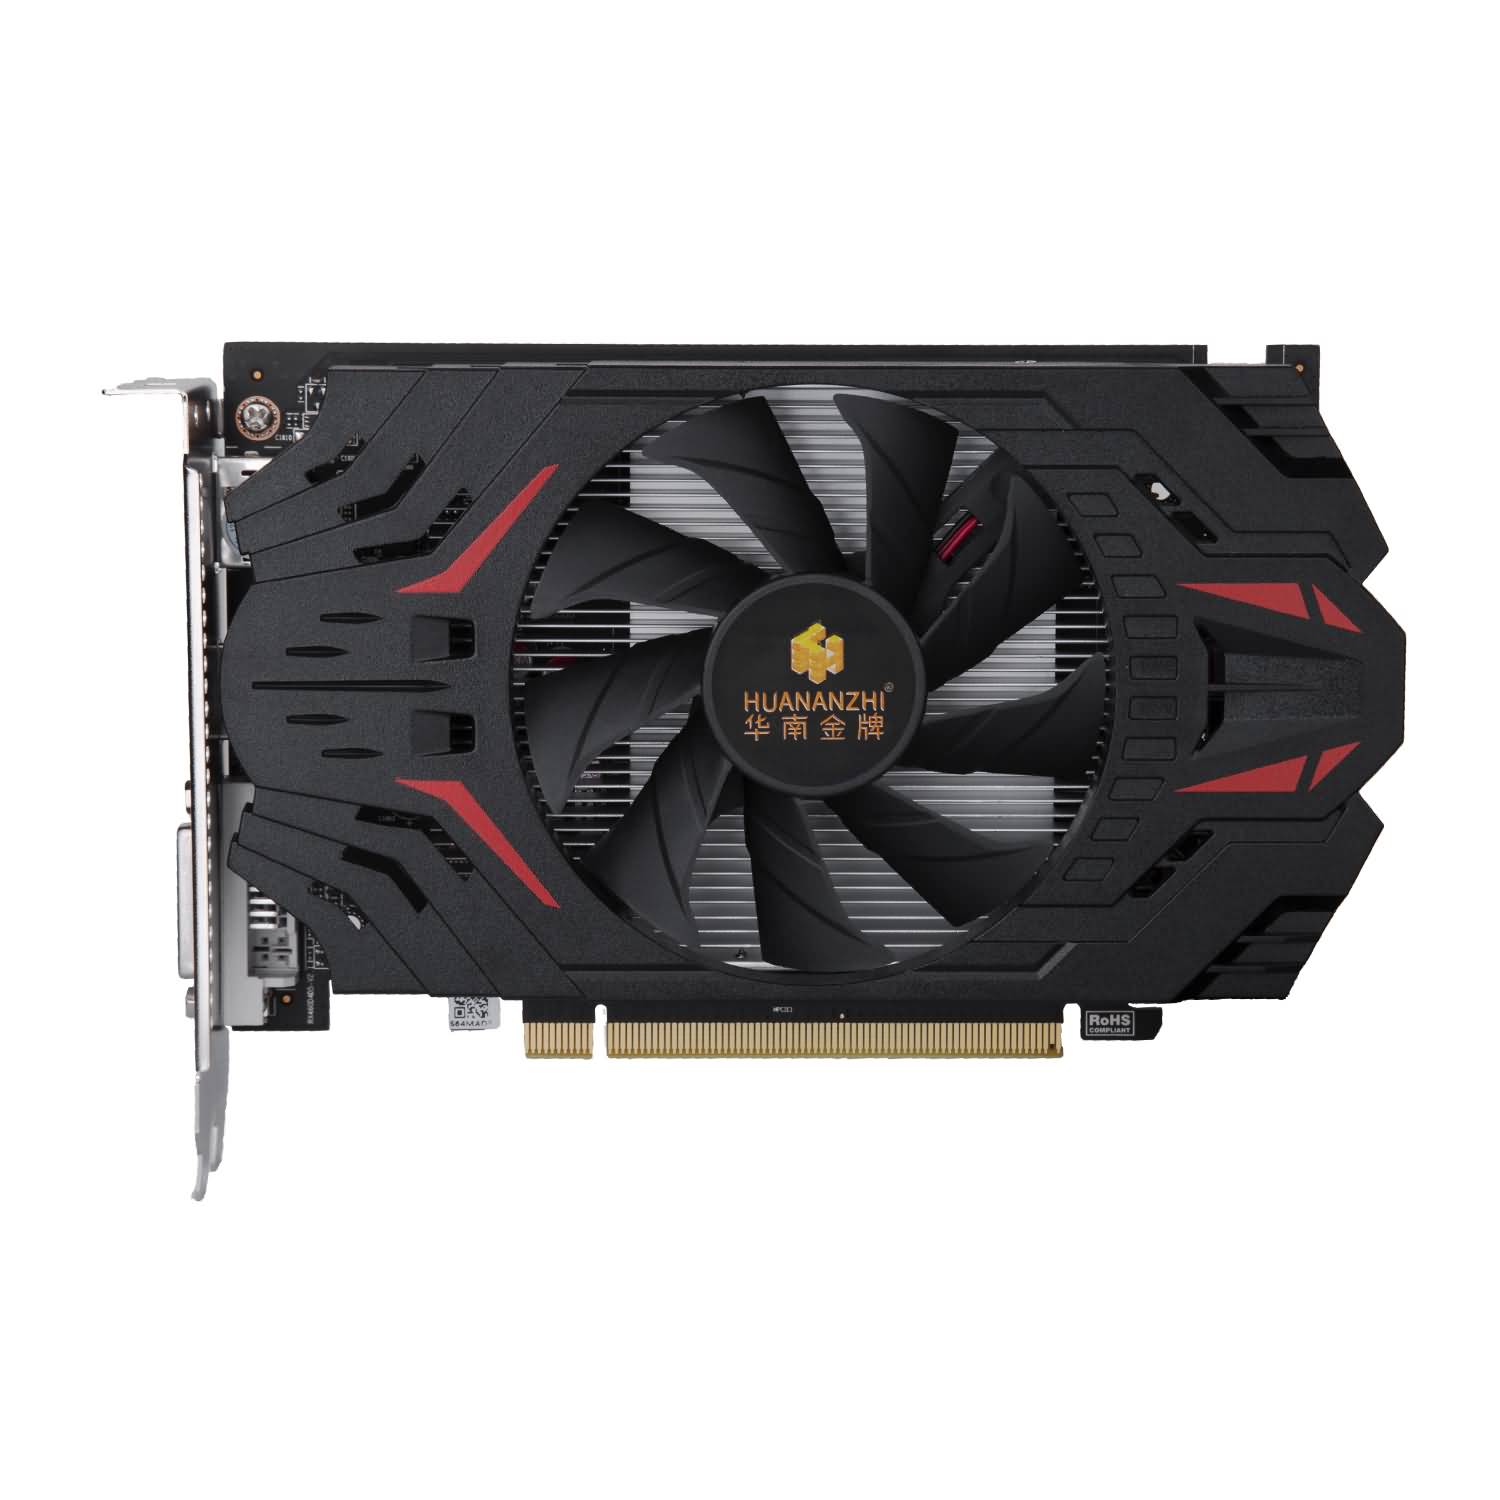 Download Huananzhi RX560 4G Graphics Card Free